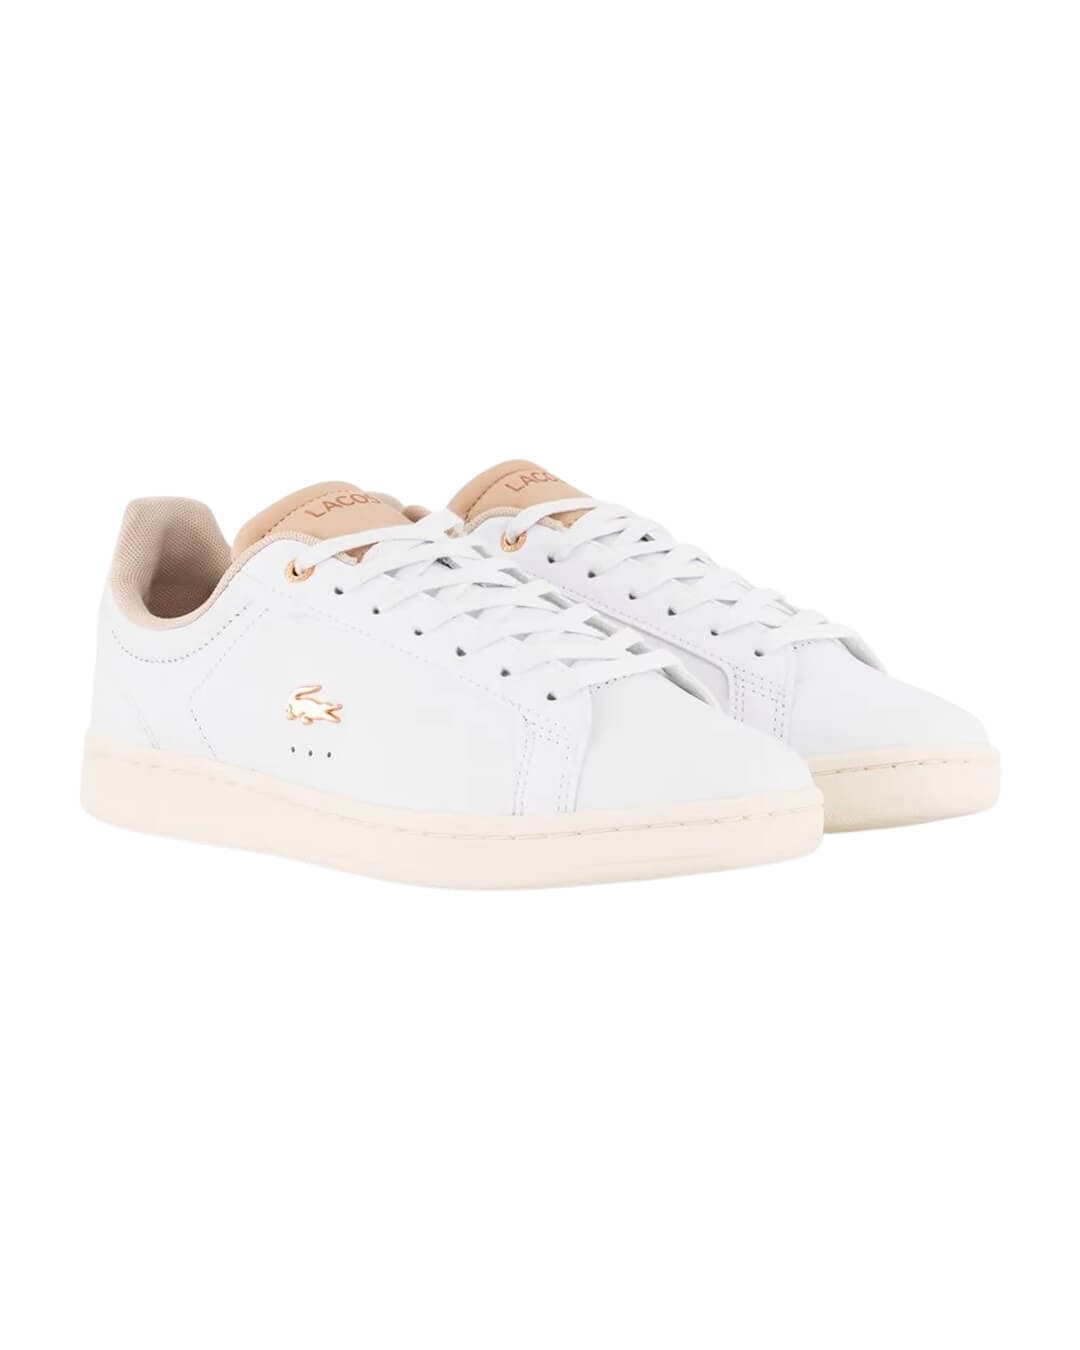 Lacoste Shoes Lacoste Carnaby Pro Leather Sneakers